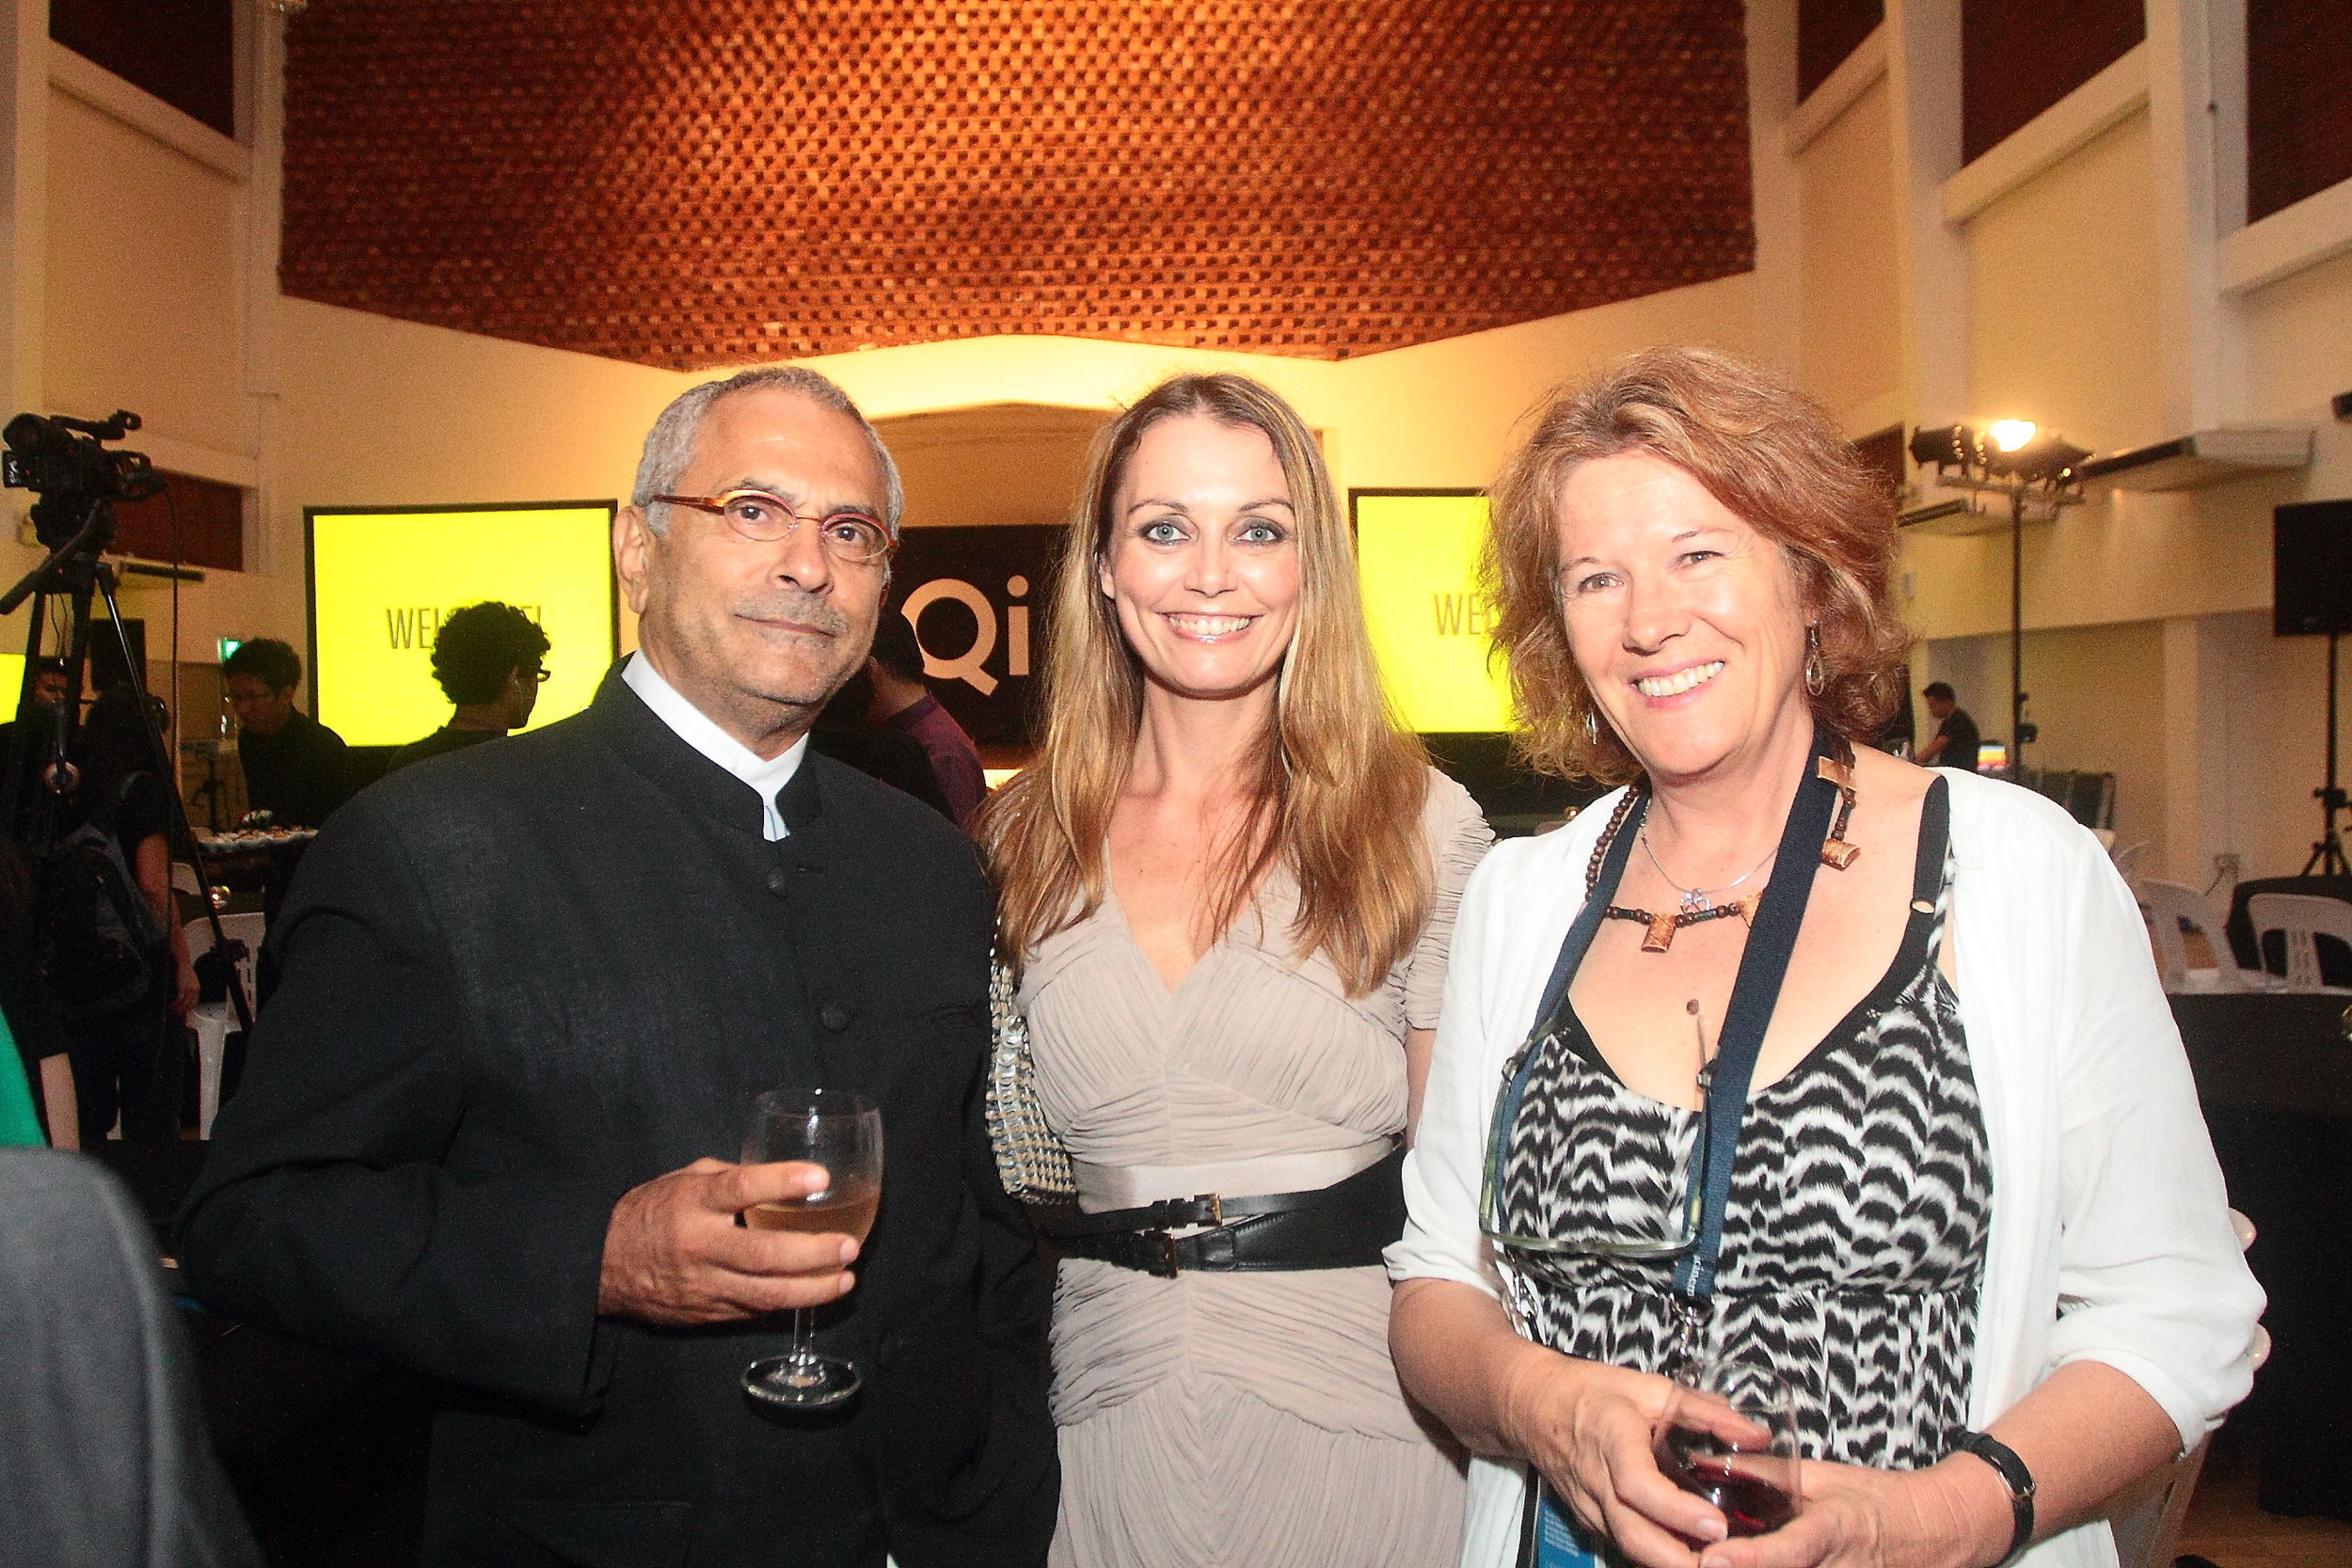 (L-R) President Dr. Ramos-Horta; Mamakan, Co-founder of Qi GLOBAL; Dr. Cathy Henkel, film director and producer.